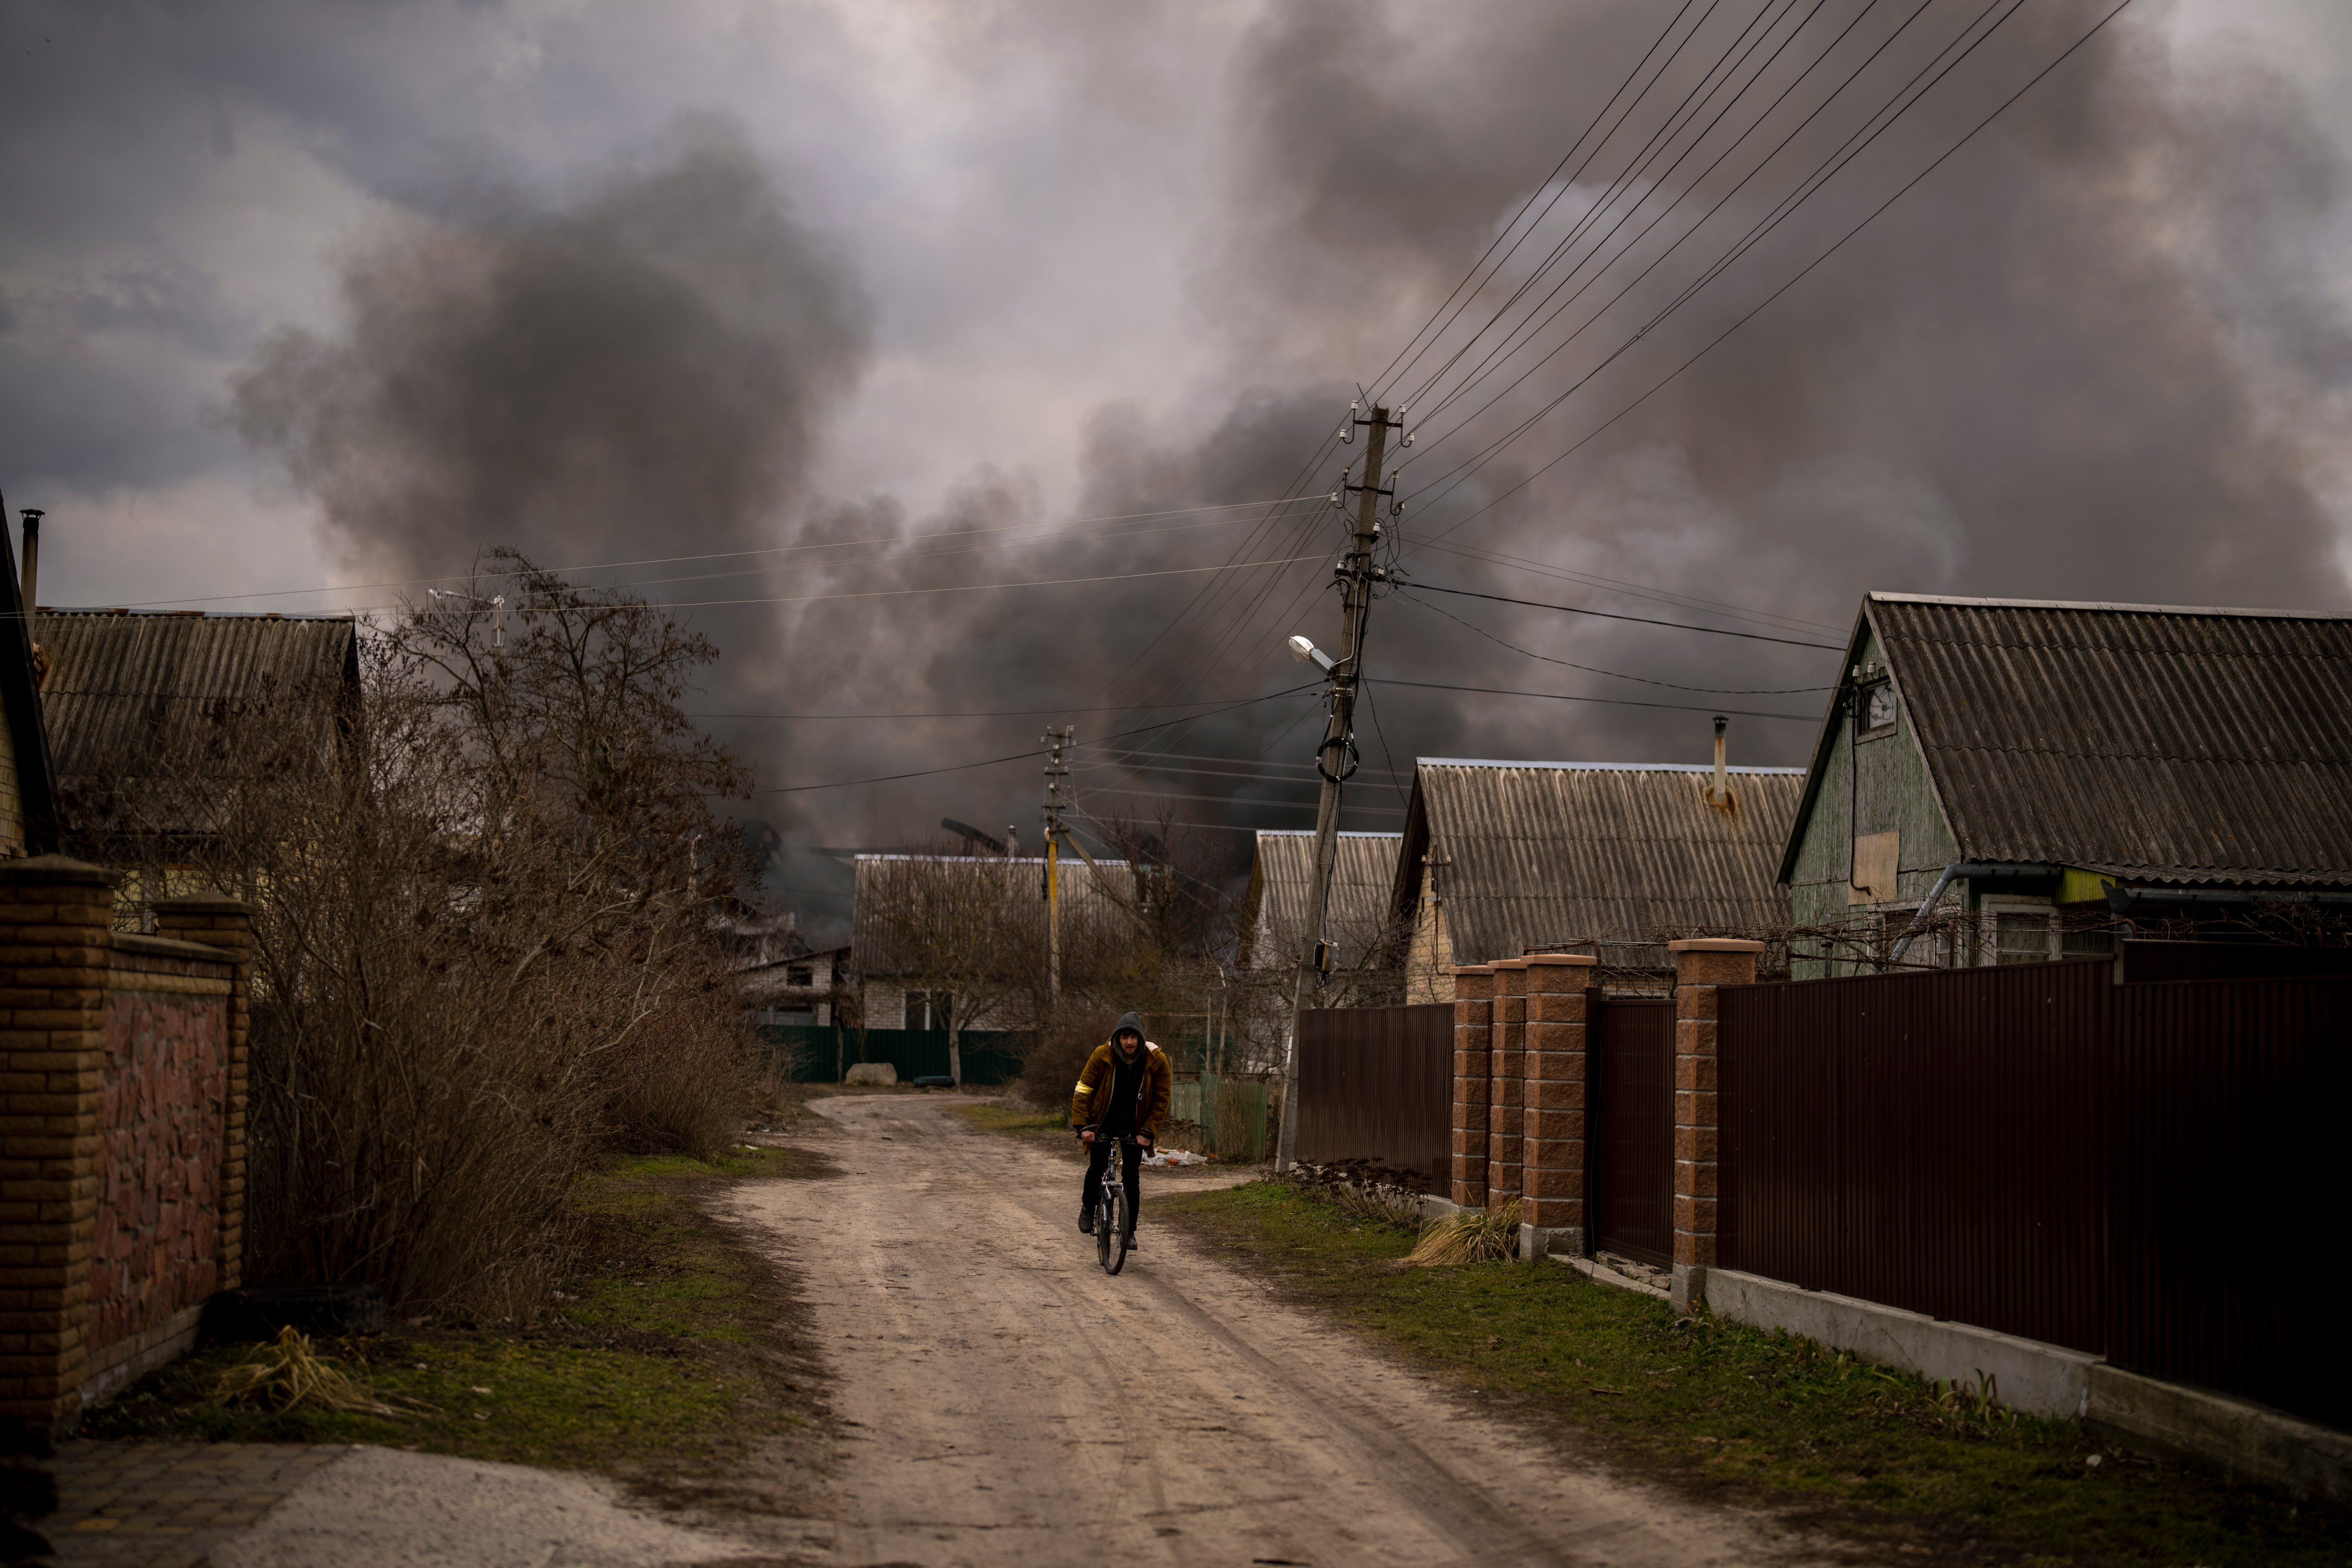 A Ukrainian man rides his bicycle near to a factory and a store burning after been bombarded in Irpin, on the outskirts of Kyiv, Ukraine, Sunday, March 6, 2022. (AP Photo/Oleksandr Ratushniak)